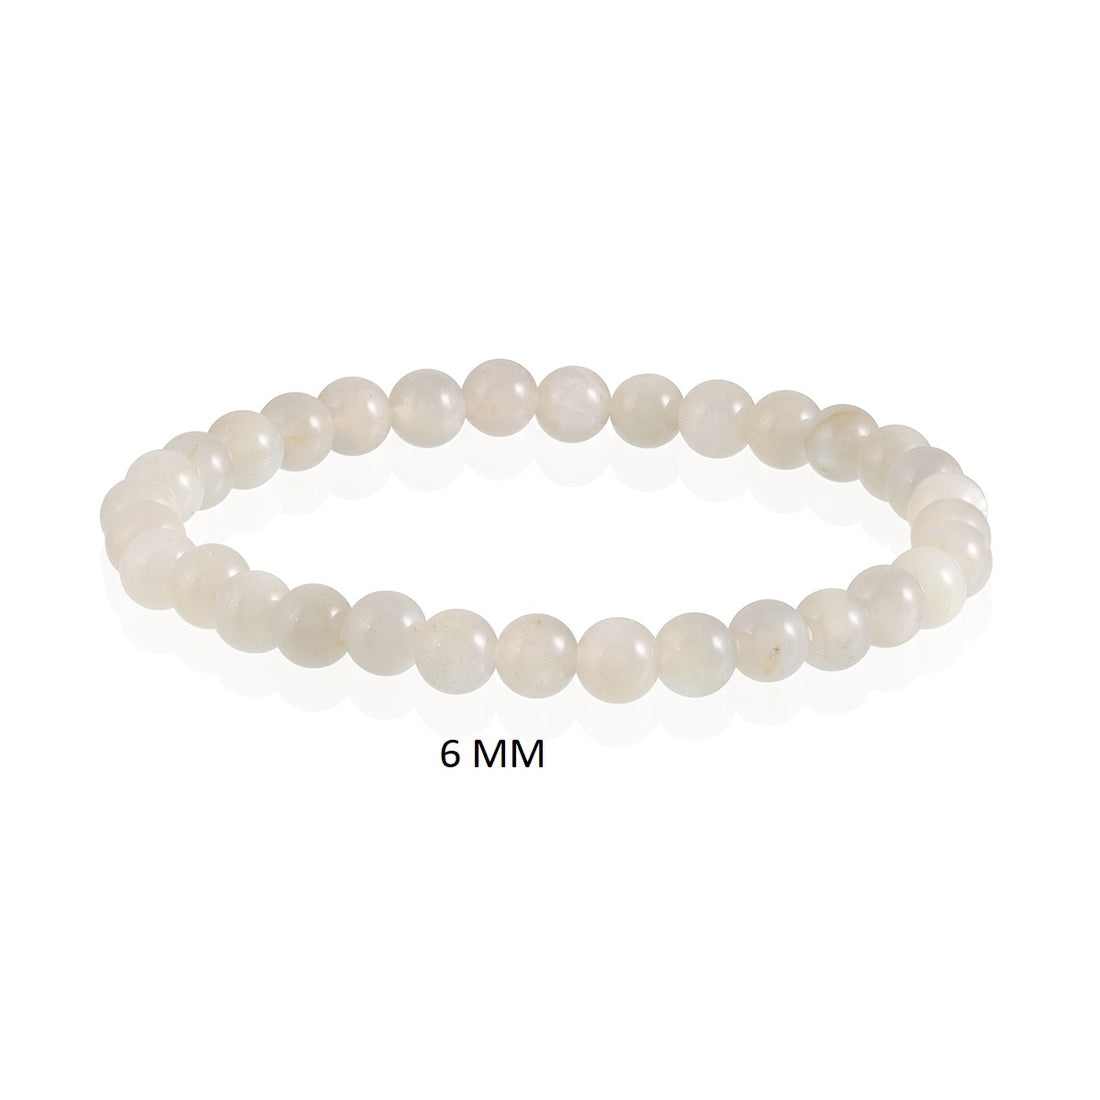 Symbolic image representing heightened intuition associated with the Gray Moonstone Bracelet, showcasing it as a fashionable accessory radiating intuitive balance and clarity